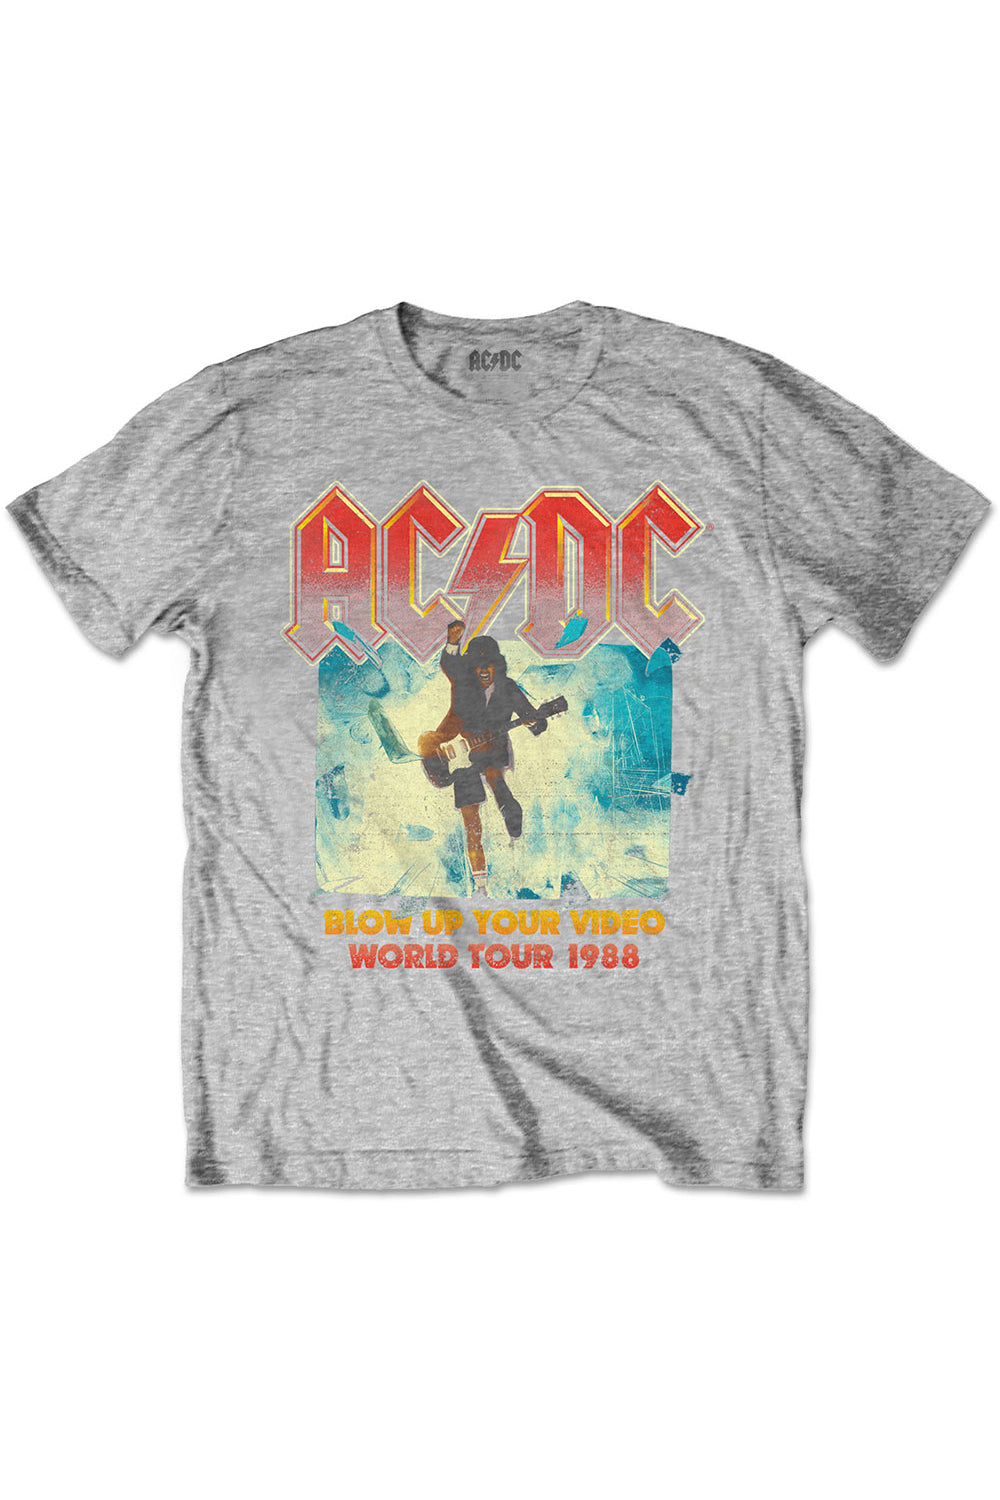 AC DC blow up your video grey t-shirt.